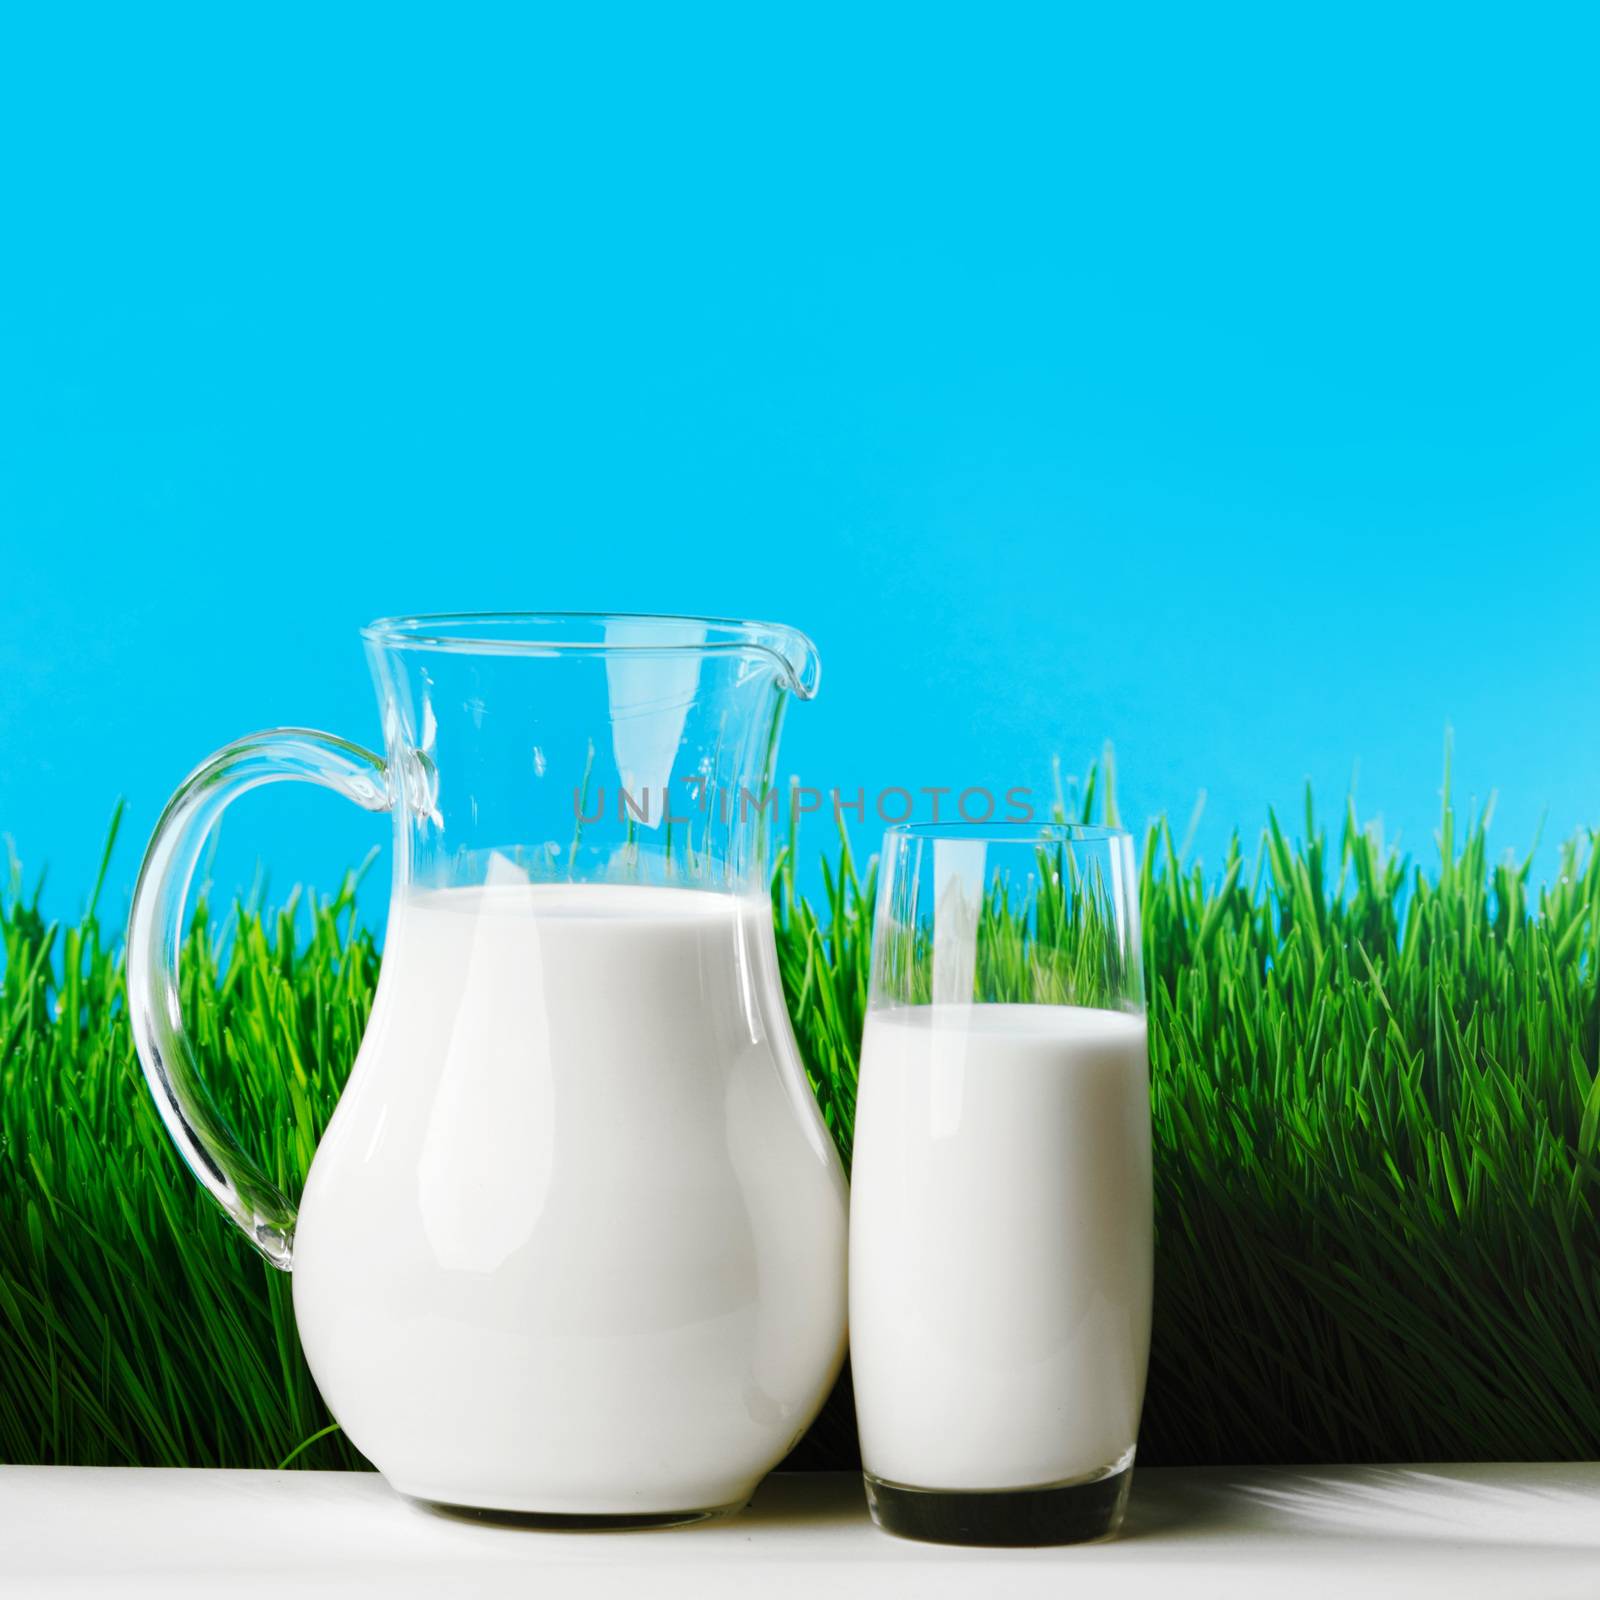 Milk jug and glass on grass field by Yellowj